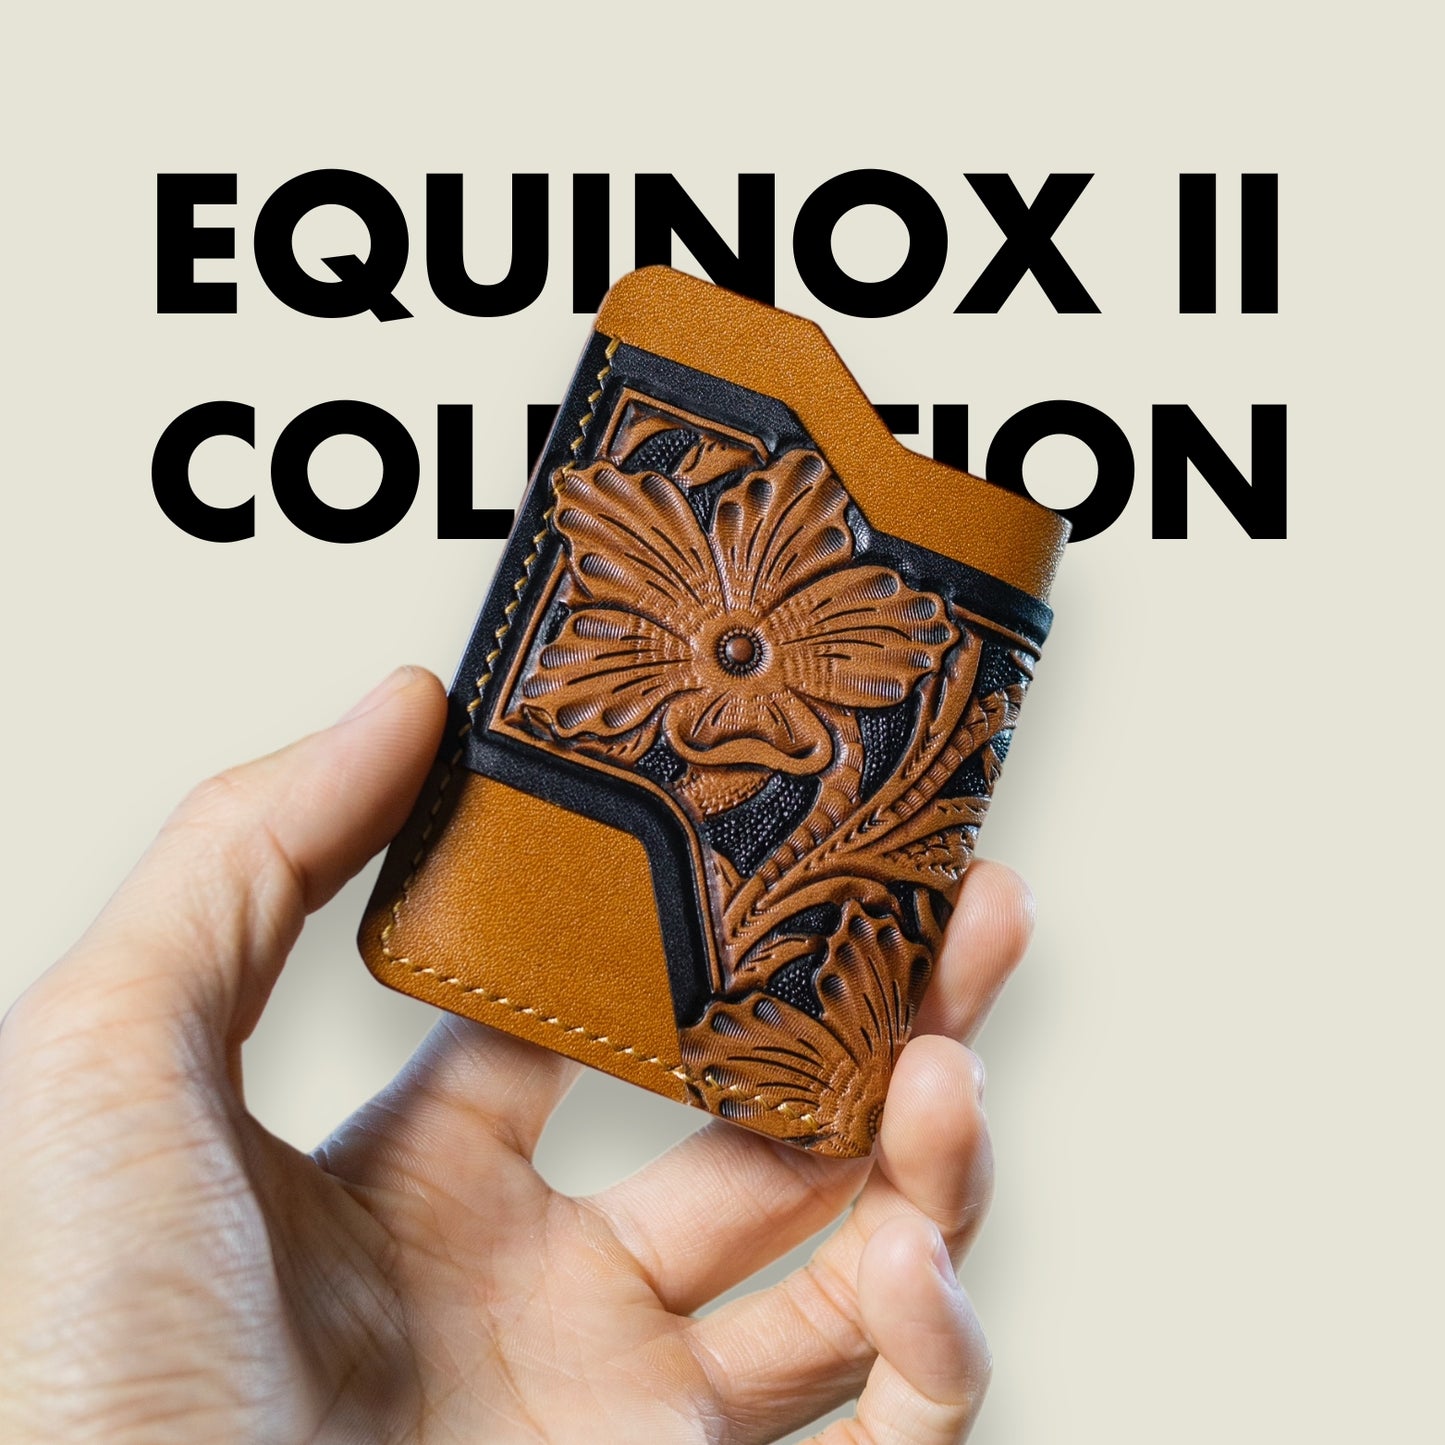 The Equinox II Collection